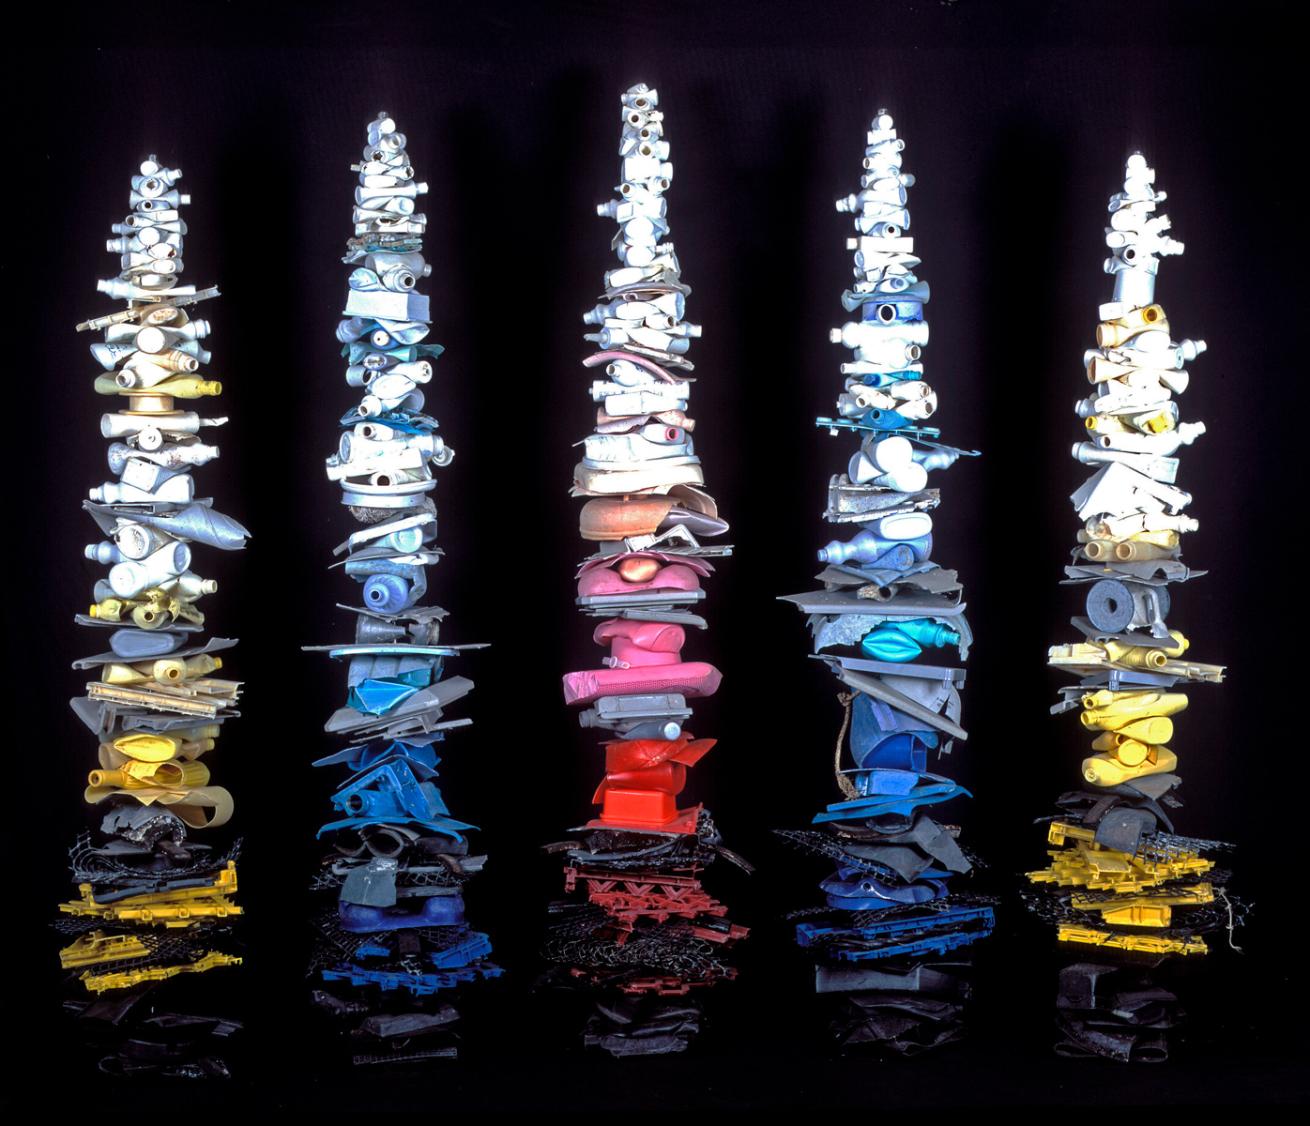 Part of a series of totem sculptures created using colorful plastics collected on beaches.